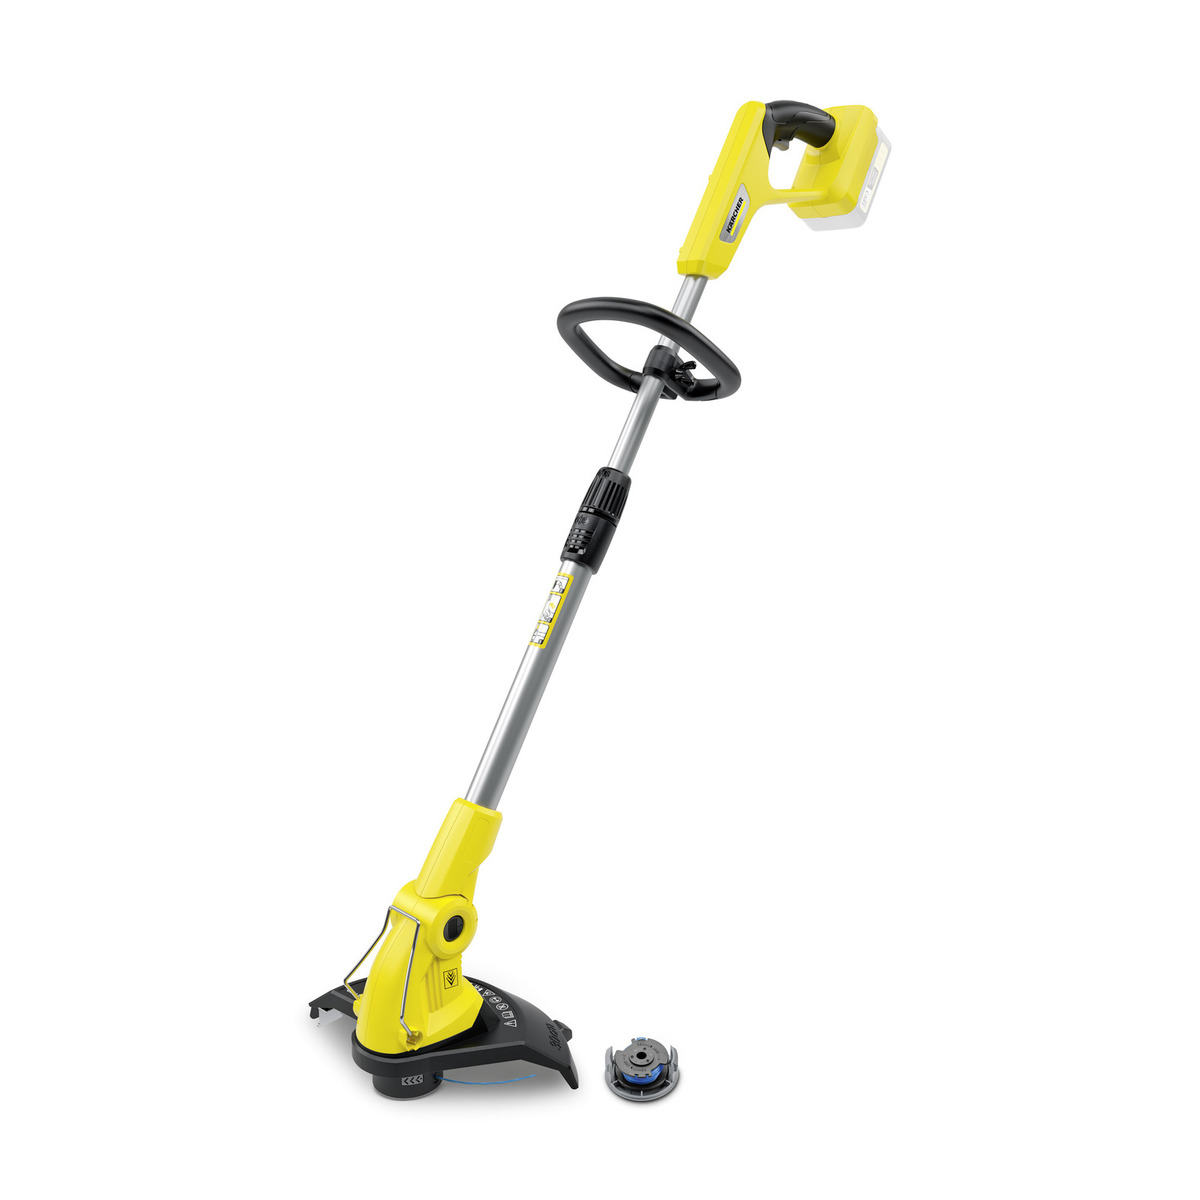 Save 20%: BATTERY LAWN TRIMMER LTR 18-30 CORDLESS GRASS TRIMMER